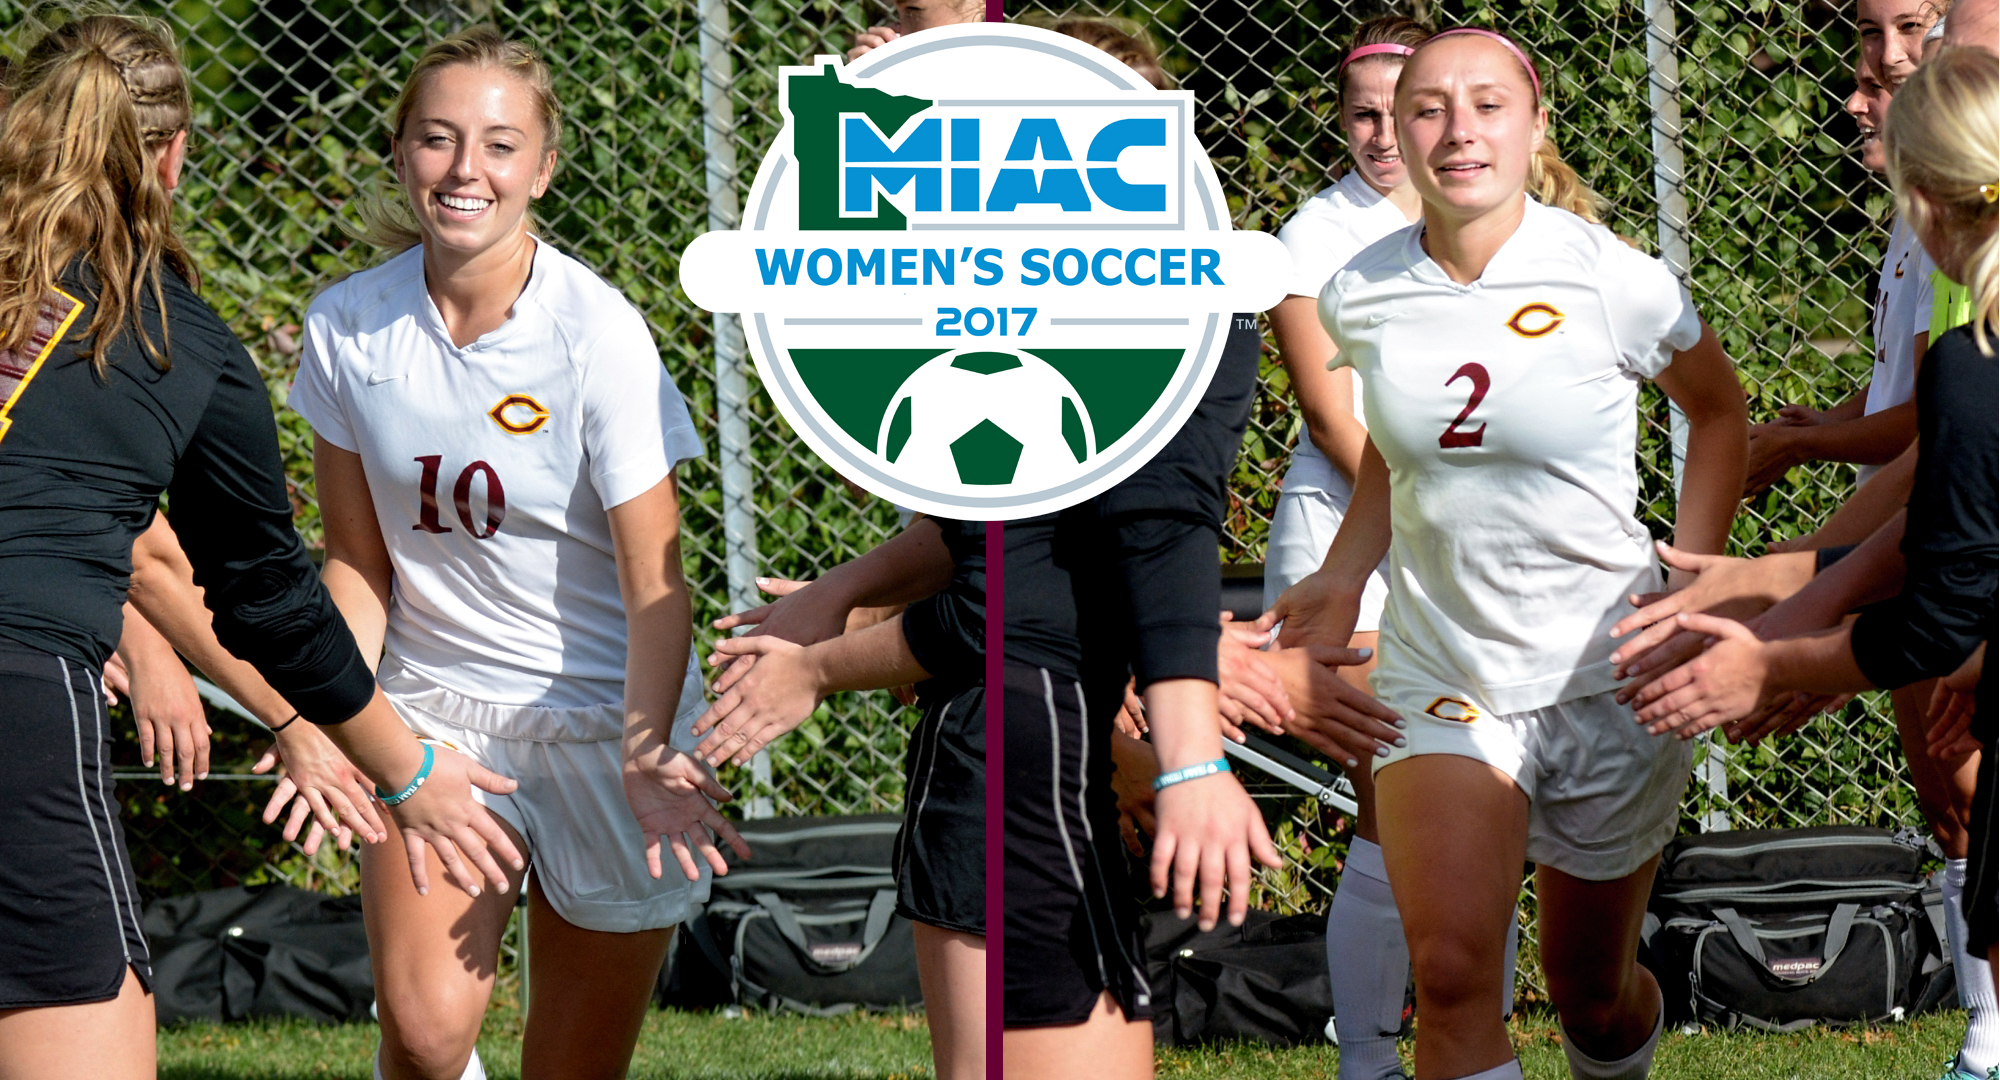 Kayla Dostal (L) was named to the MIAC All-Conference All-Conference Team while Katie Gillette earned All-Conference Honorable Mention honors.